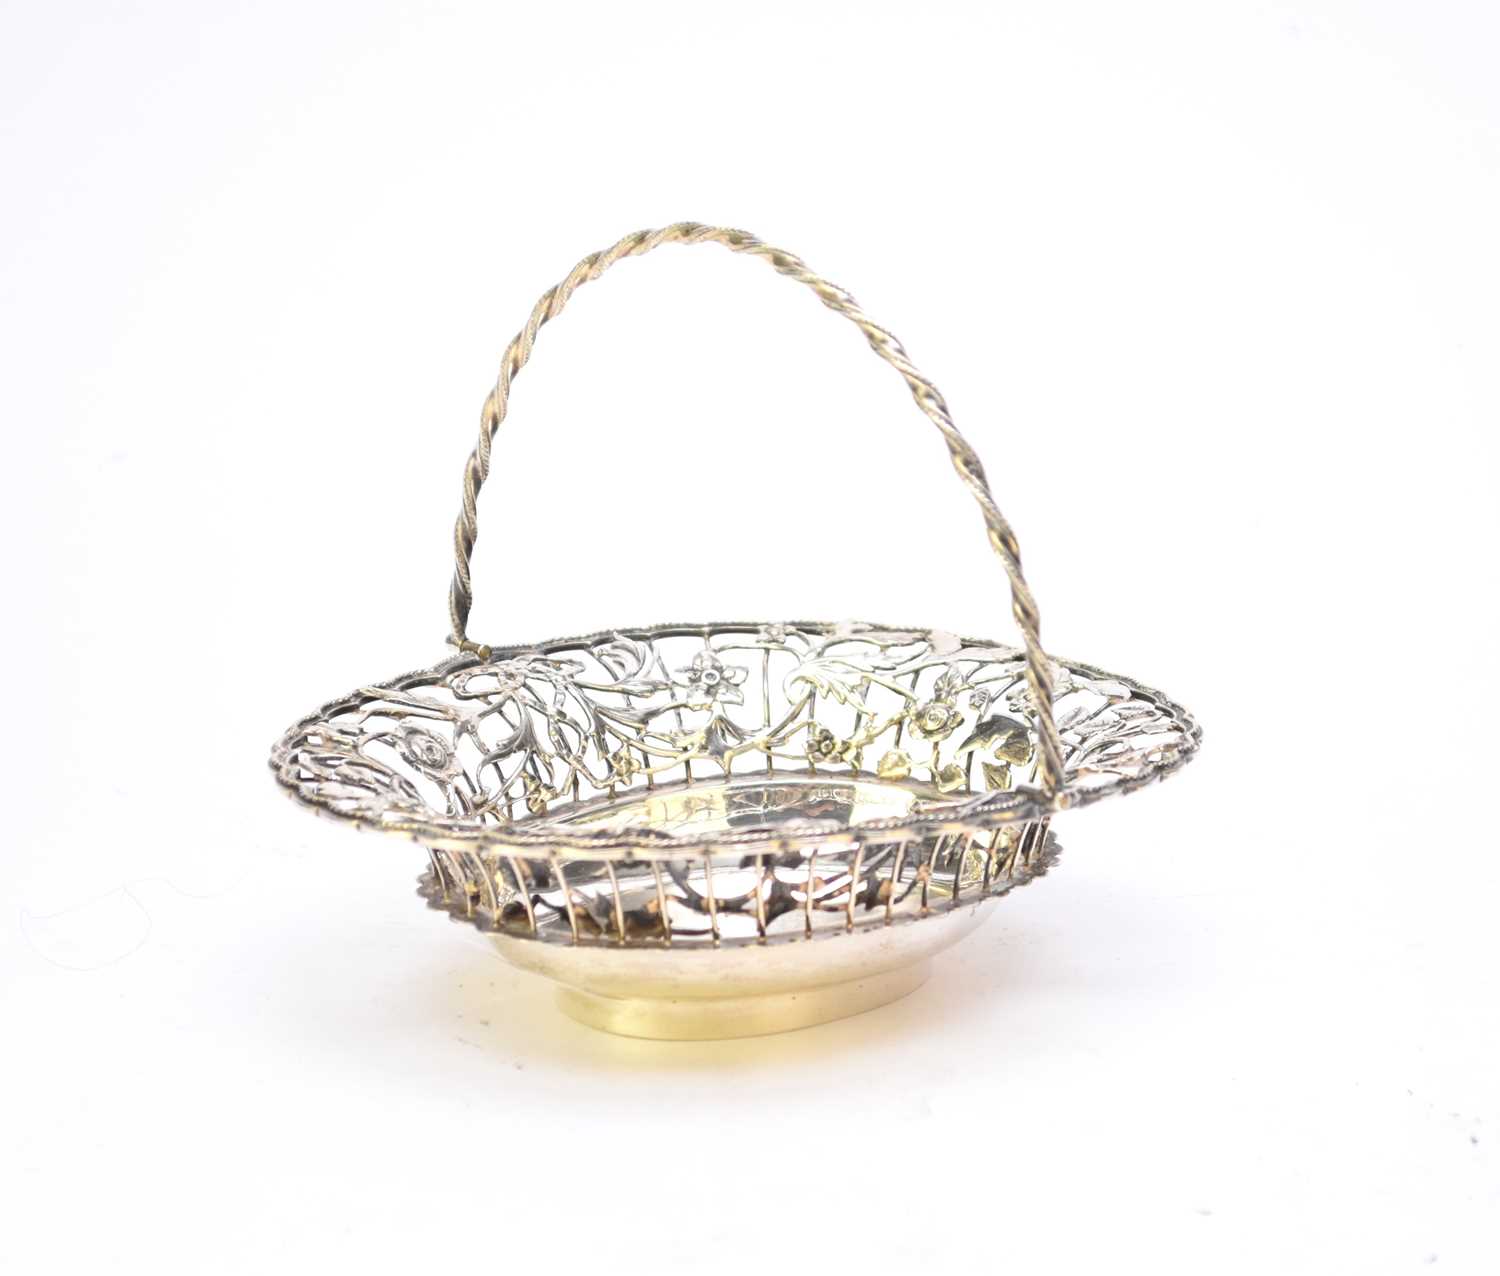 Lot 75 - An Edwardian silver swing handled basket by William Comnys